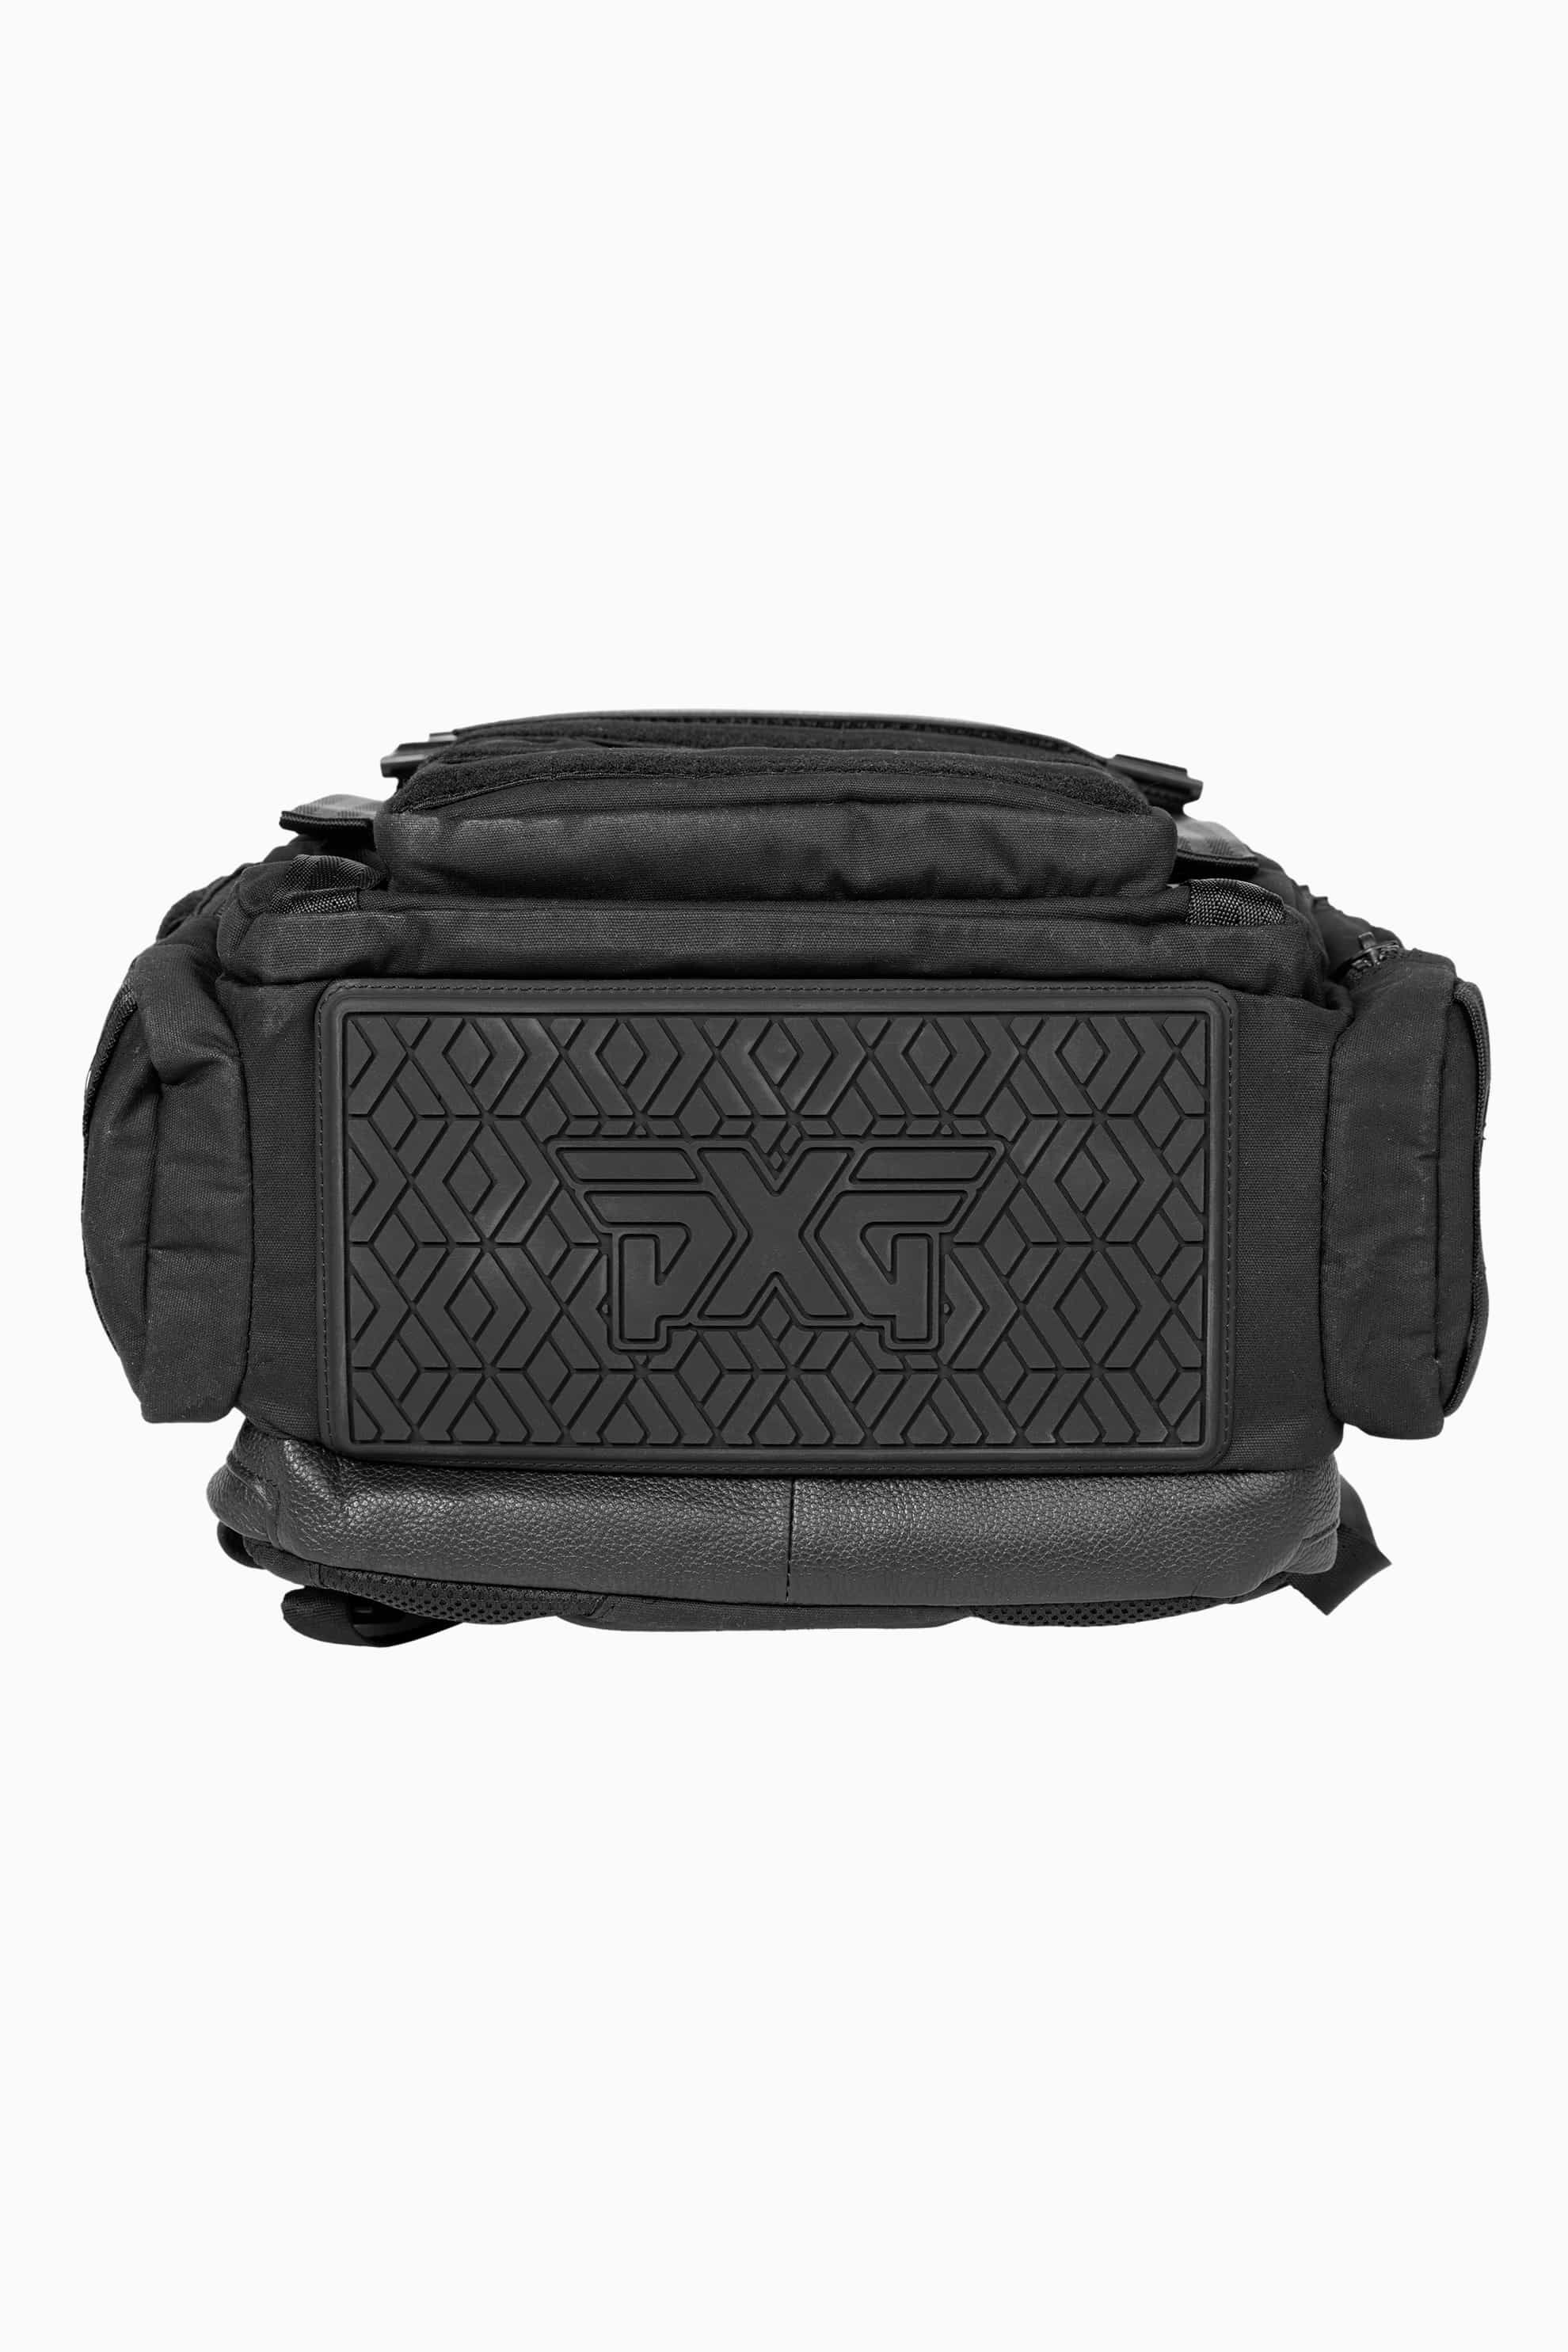 Buy PXG Darkness Troops Backpack | PXG